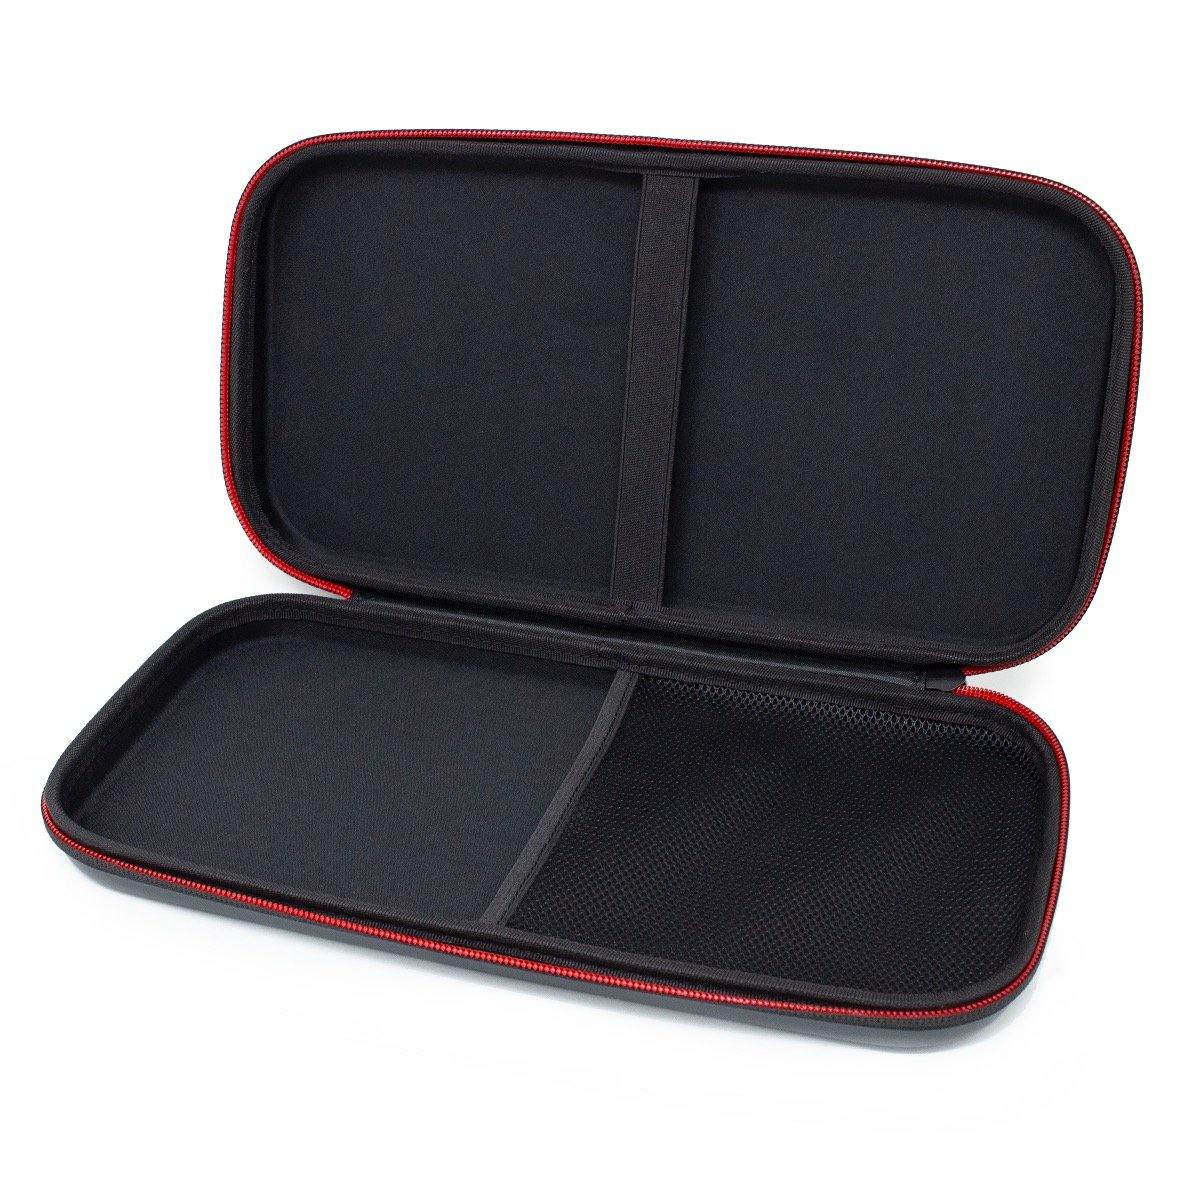 Stethoscope Case - Medium - MDF Instruments Official Store - Medical Bags and Cases